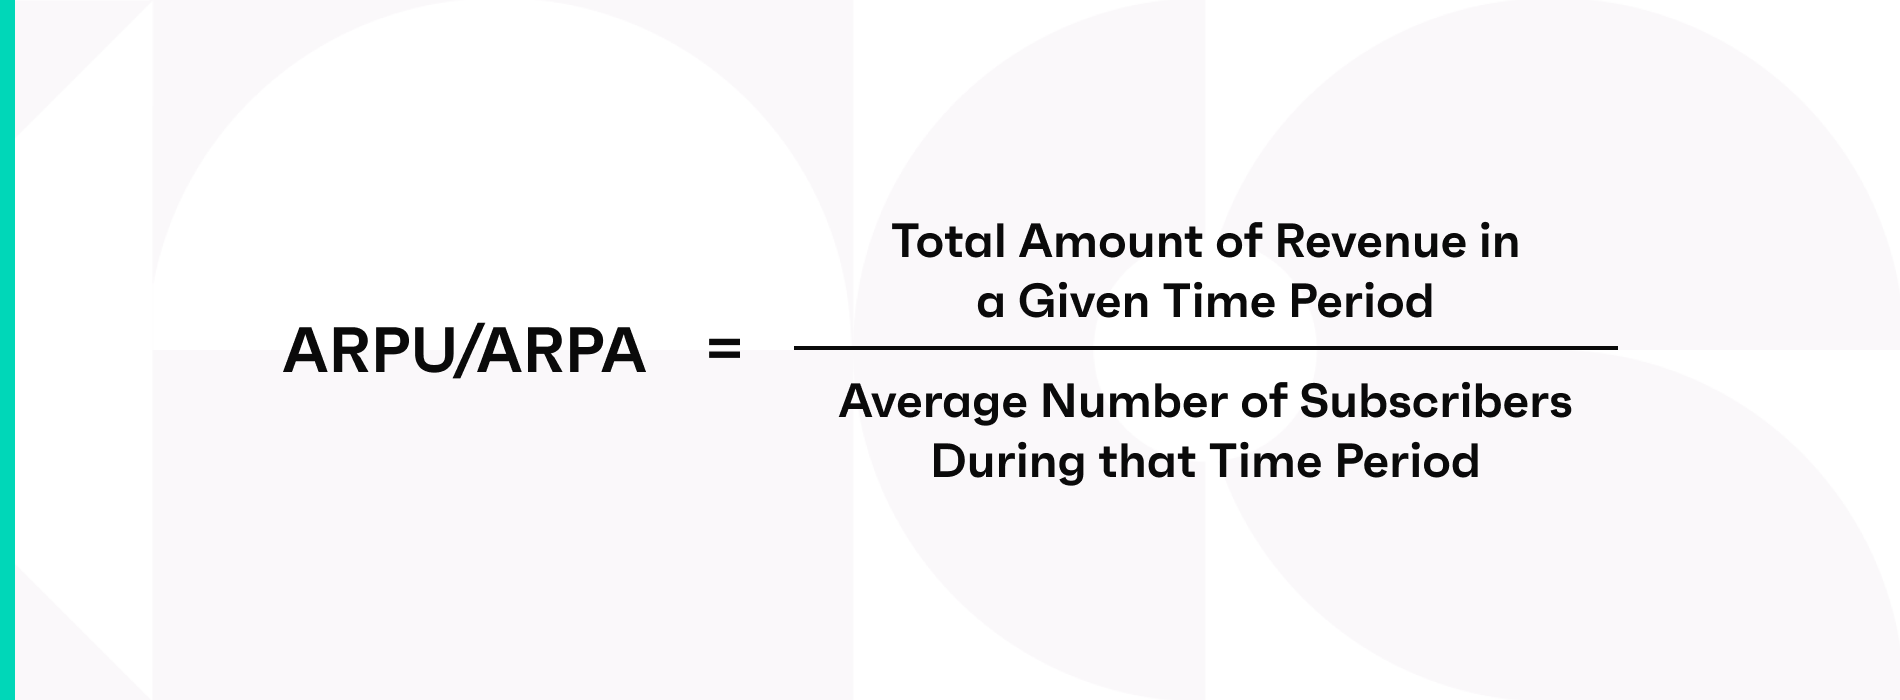 ARPU/ARPA = (total amount of revenue in a given time period) / (average number of subscribers during that time period)